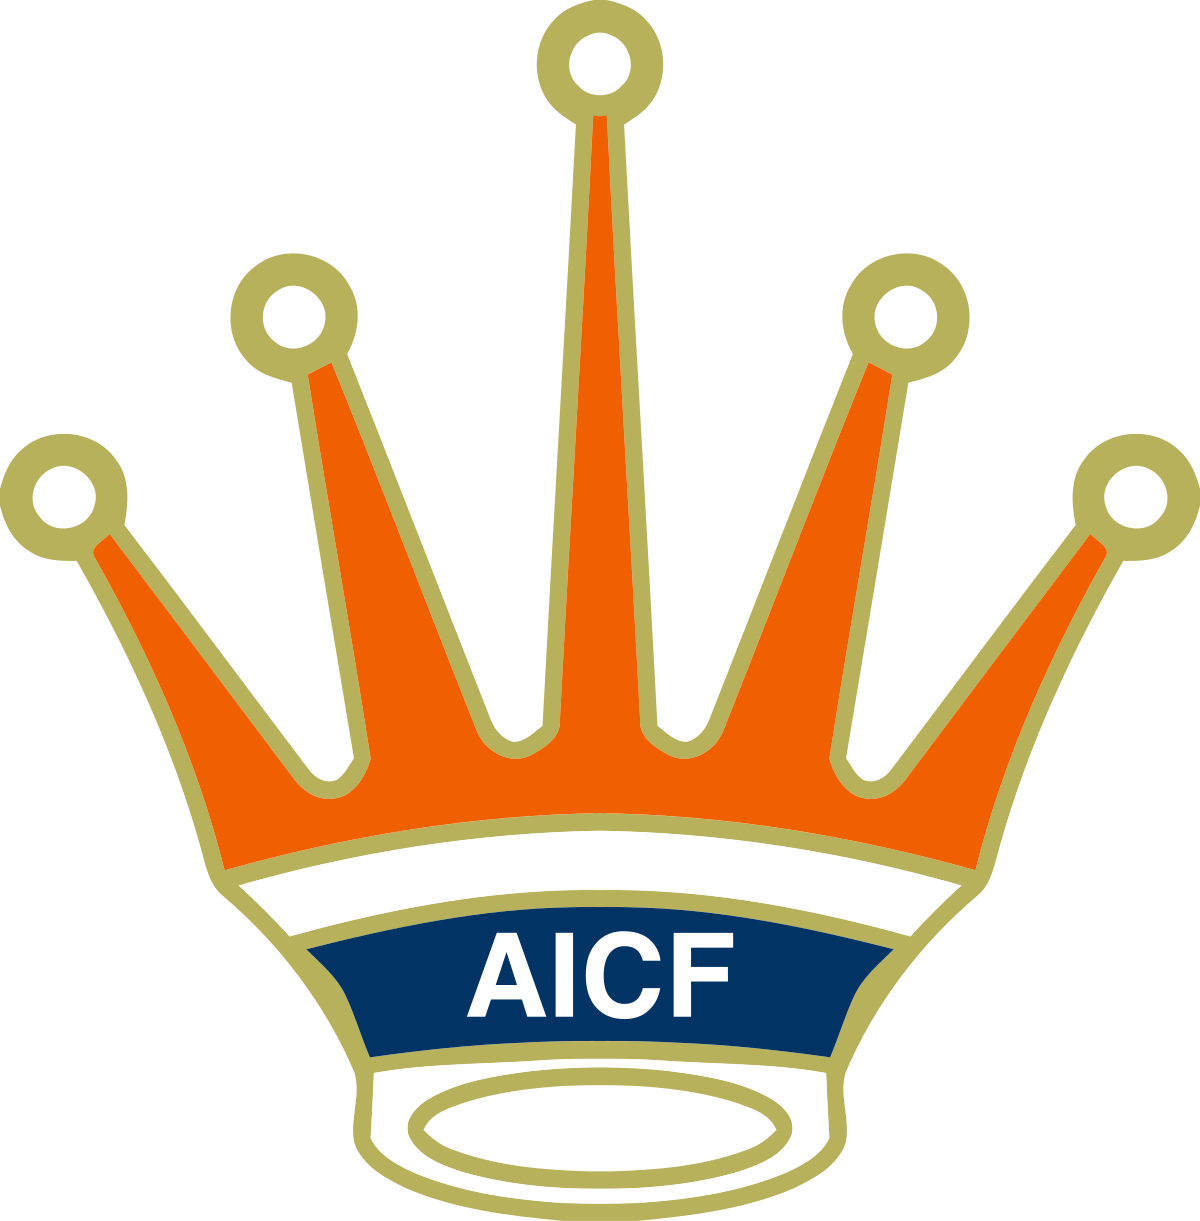 How to find chess tournaments to play in India (AICF)? 